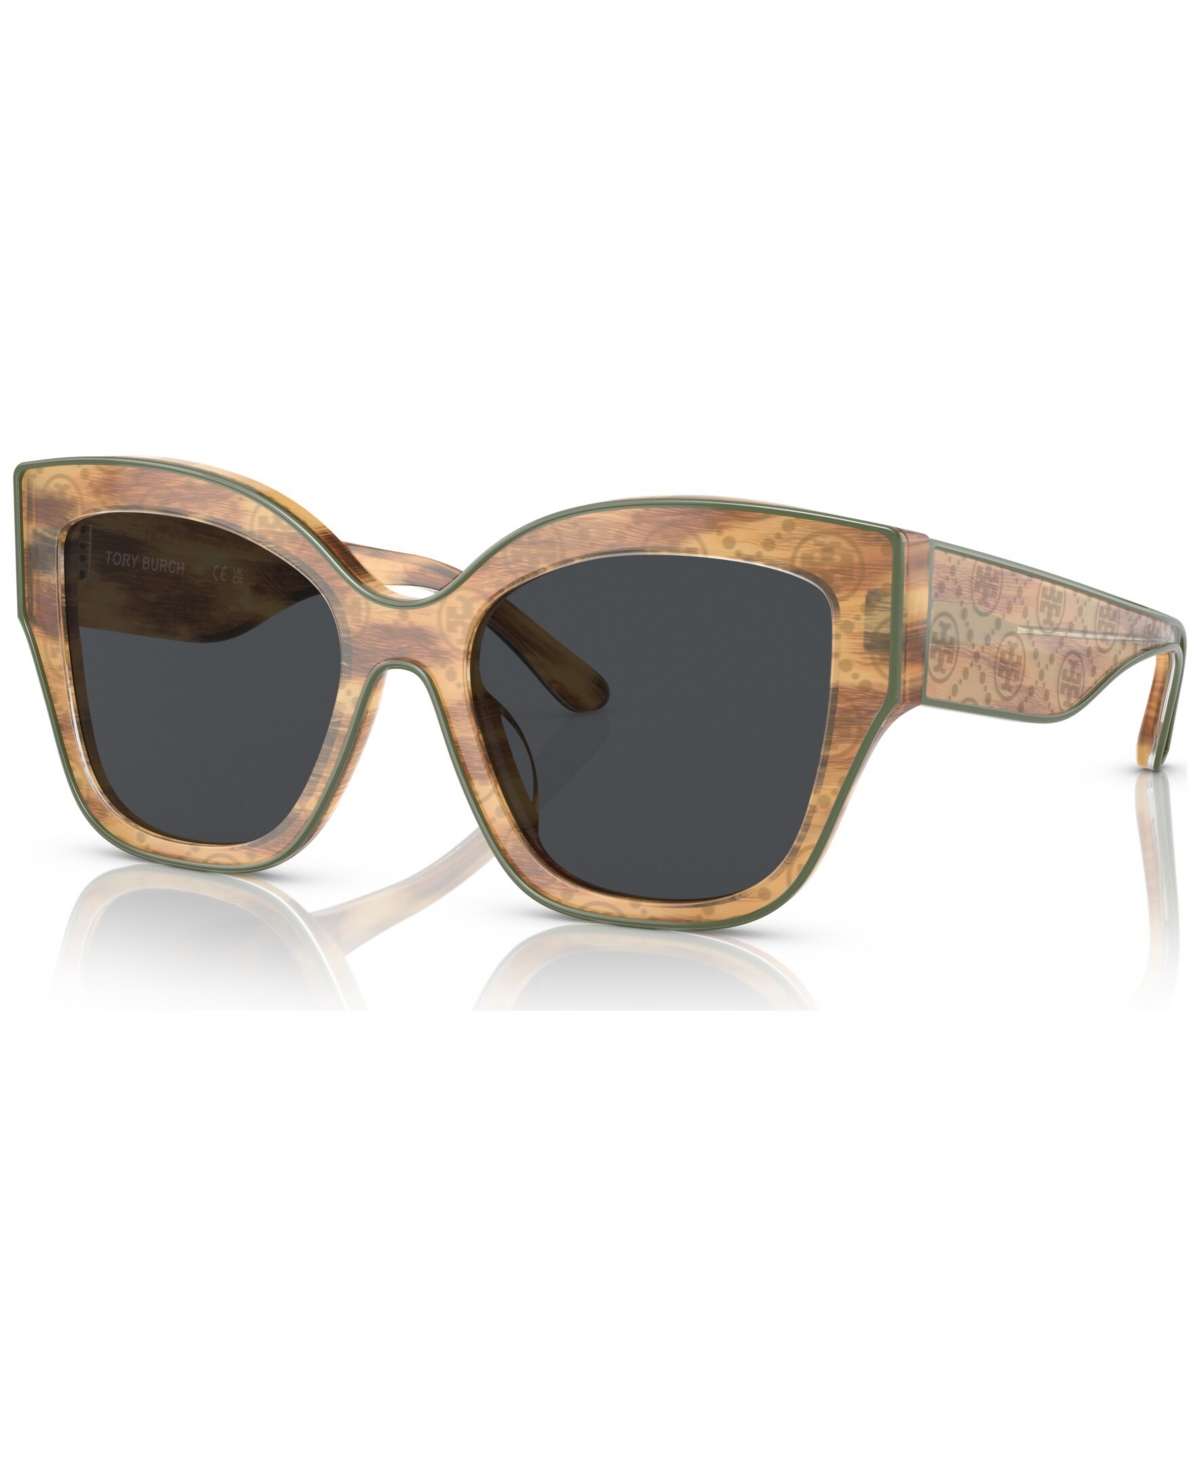 Tory Burch Women's Sunglasses, Ty7184u In Honey Wood With Olive Piping